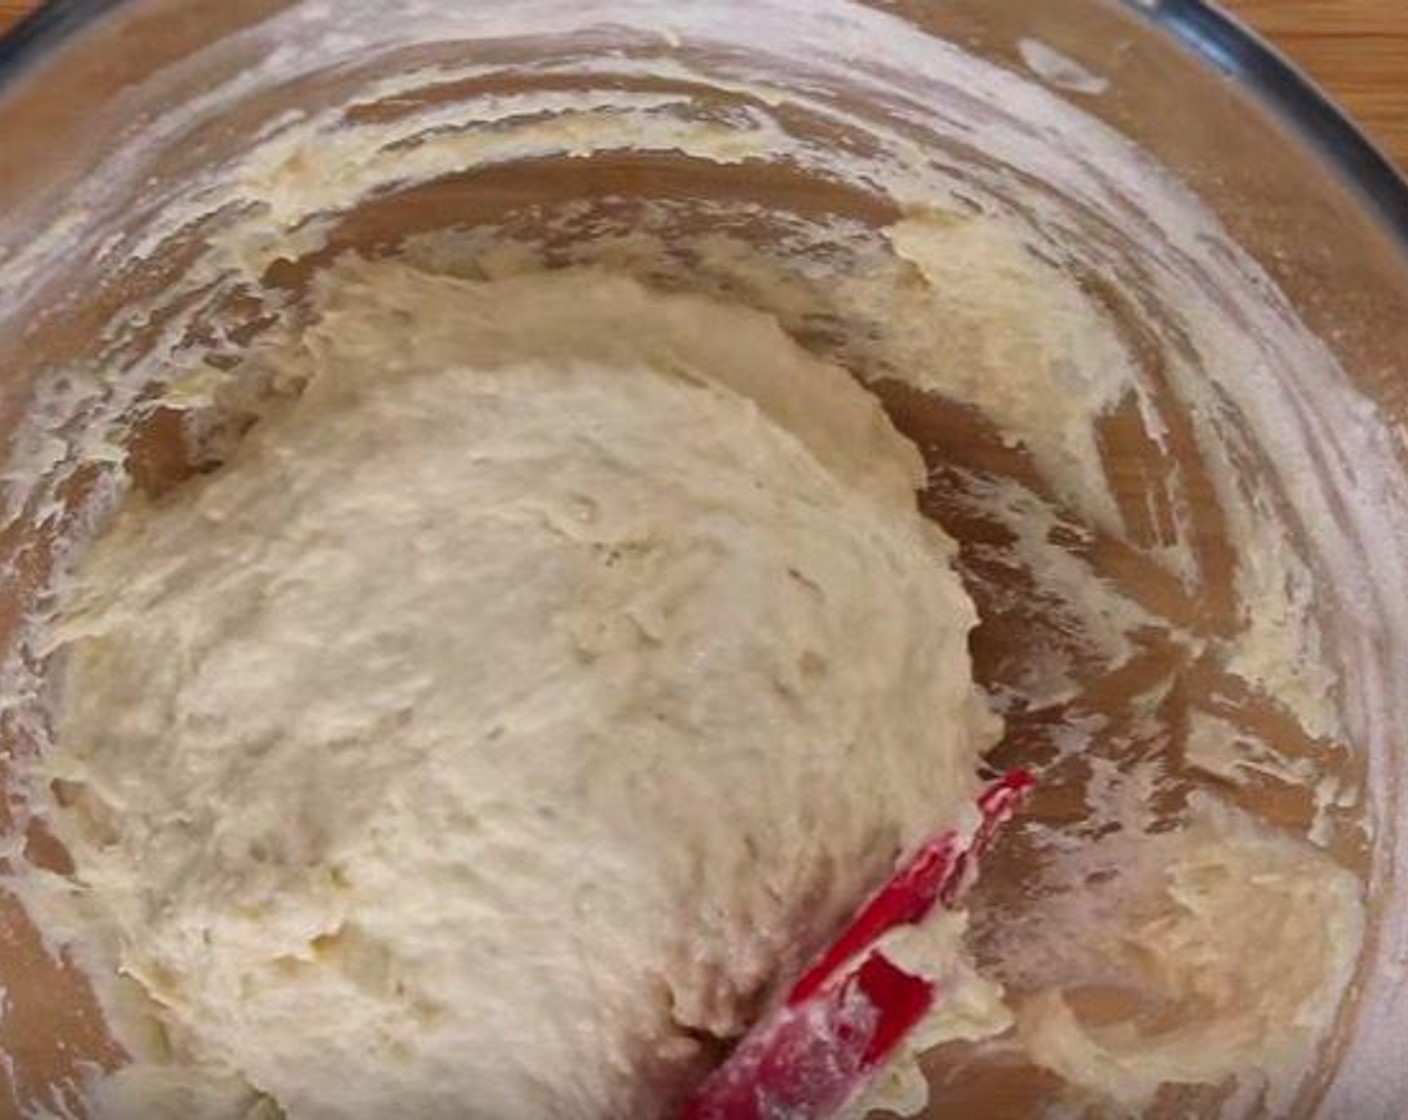 step 3 Add additional All-Purpose Flour (1 cup) and mix until well combined. Continue adding flour 1/4 cup at a time as needed until a soft dough is formed. The dough should stick to the bottom of the bowl but pull away from the sides.